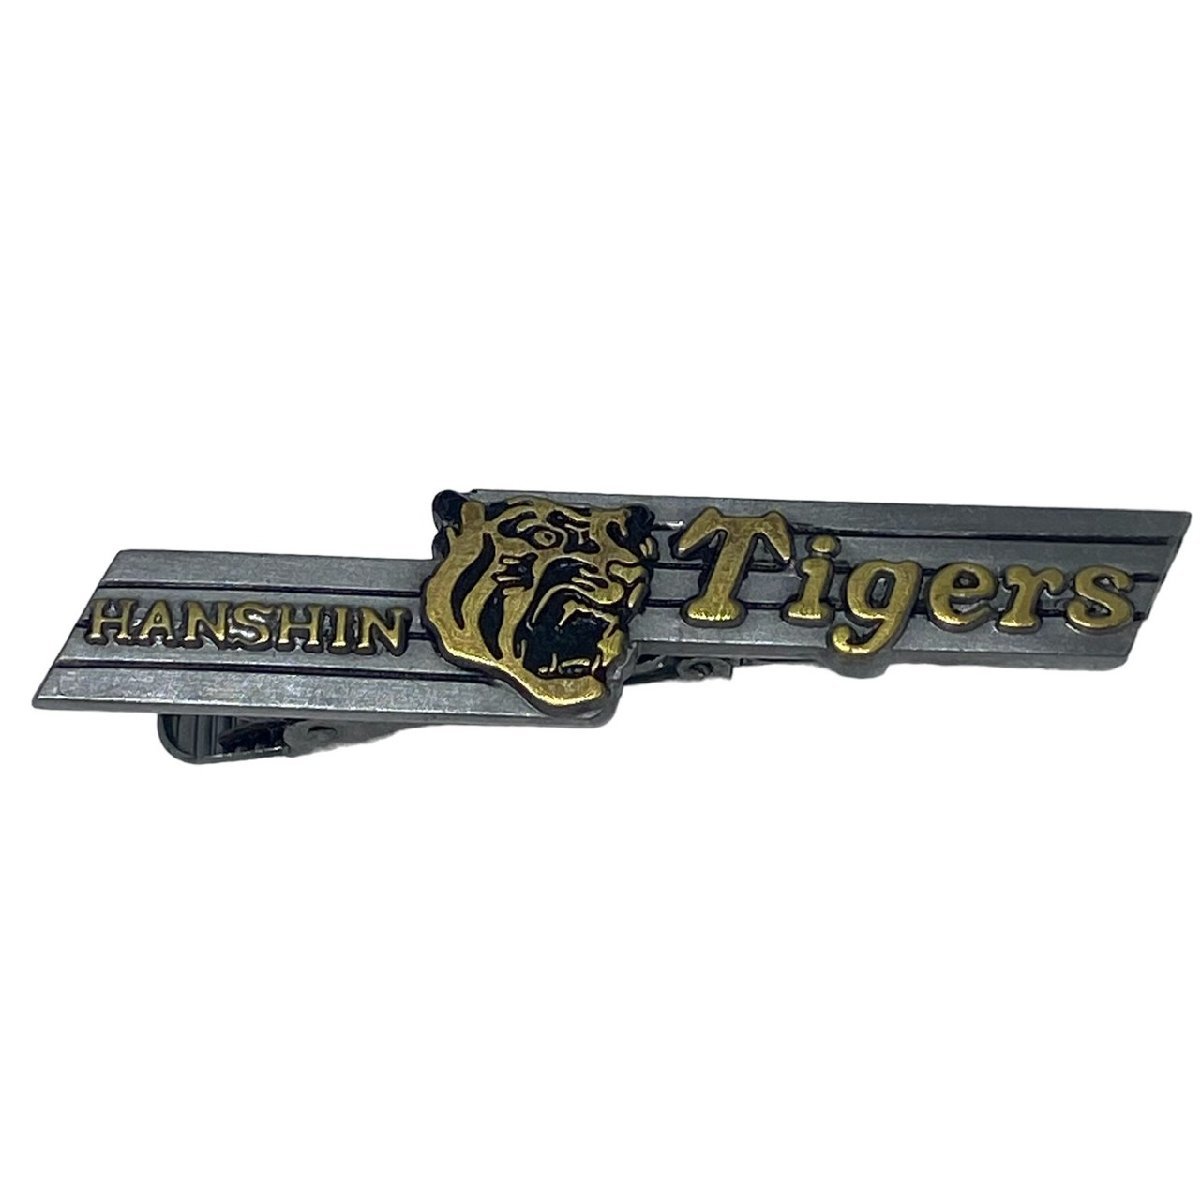 USED Hanshin Tigers necktie pin matted silver color tiepin Thai bar HANSHIN Tigers men's suit new go in company member company *84 after ..